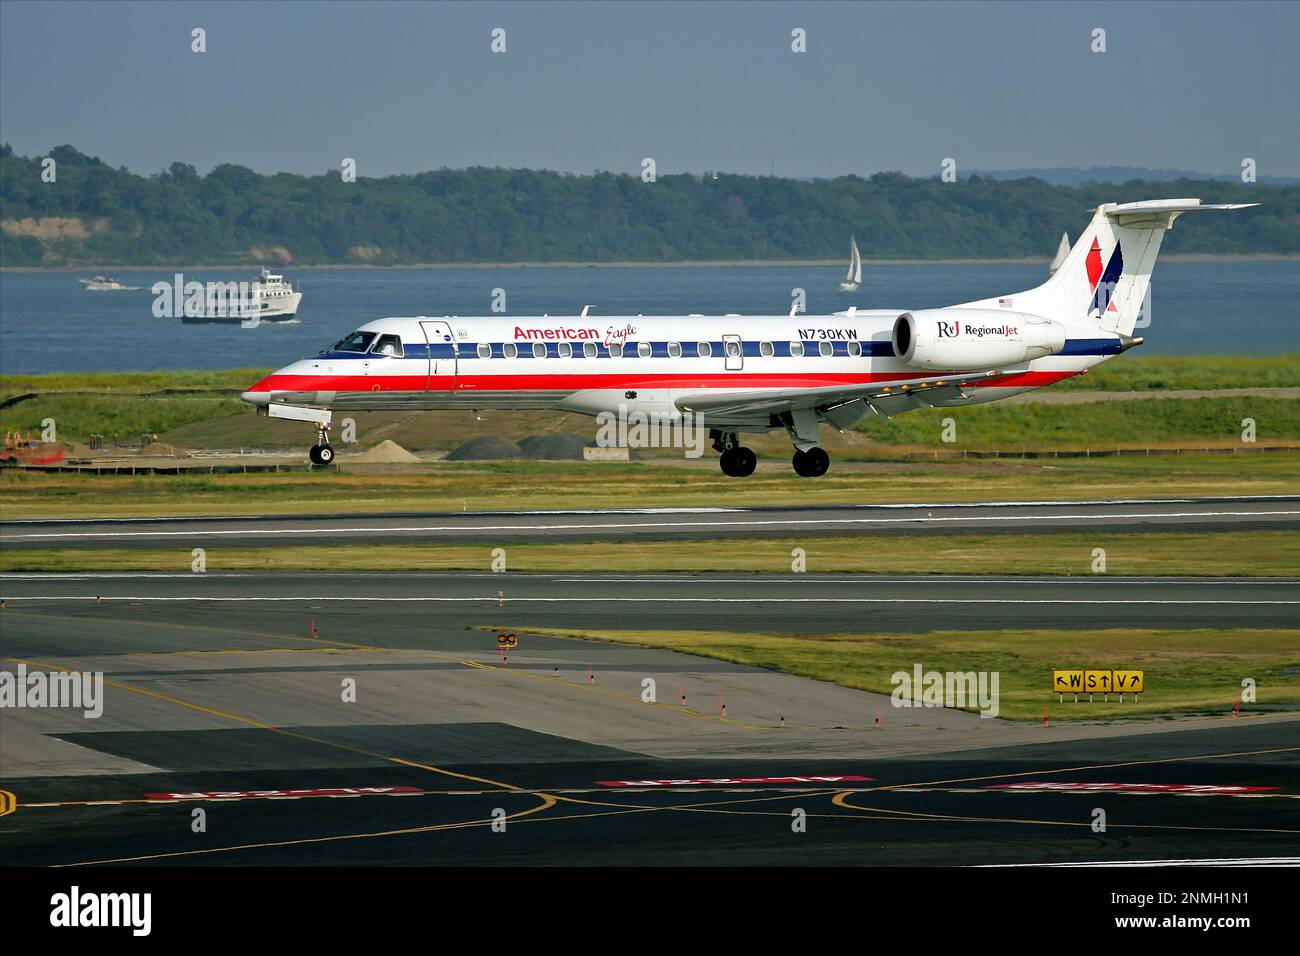 American Eagle airlines regional jet plane landing at airport, Boston Harbor background Stock Photo